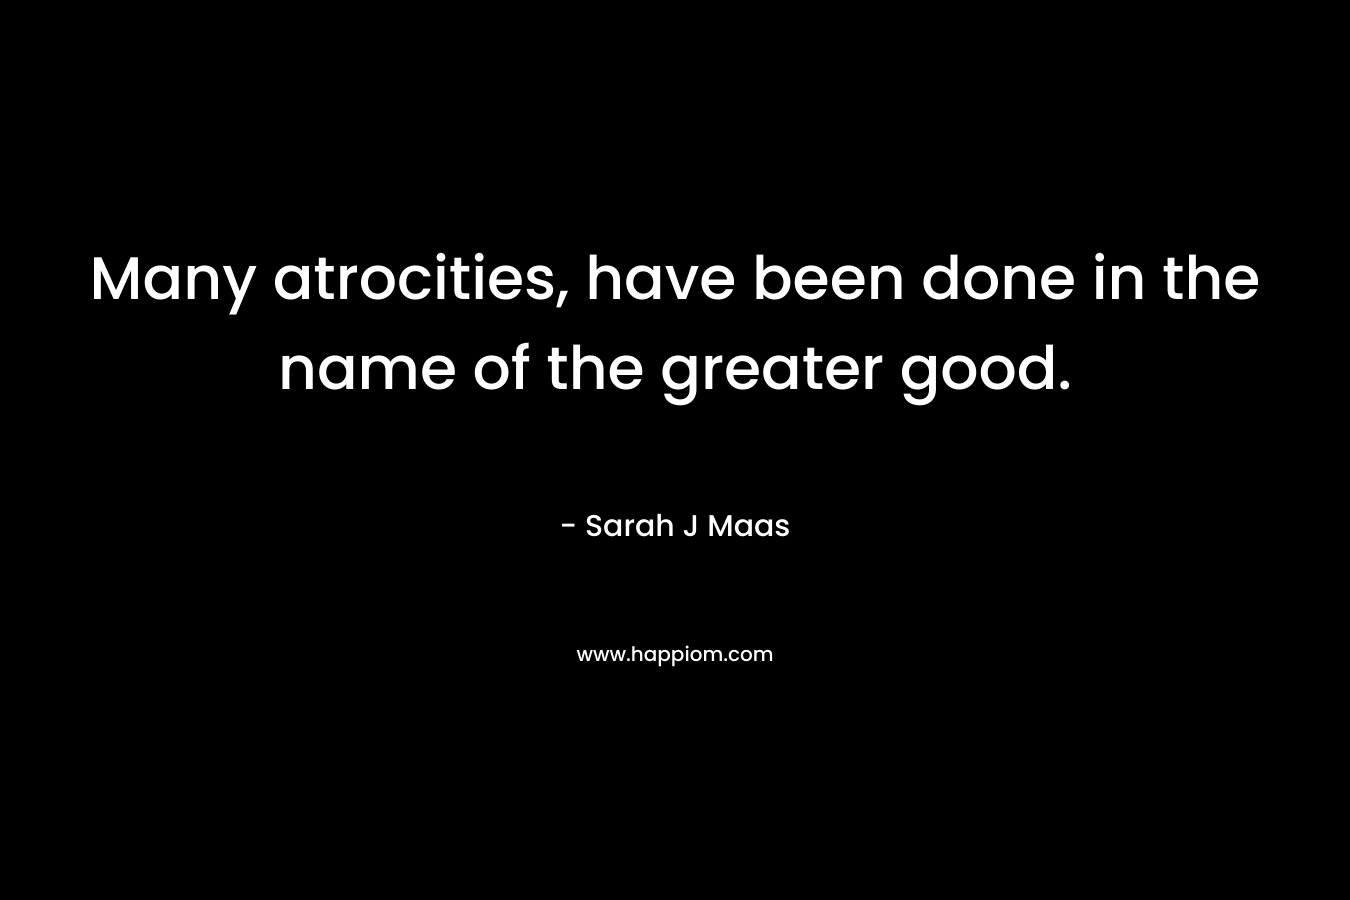 Many atrocities, have been done in the name of the greater good.